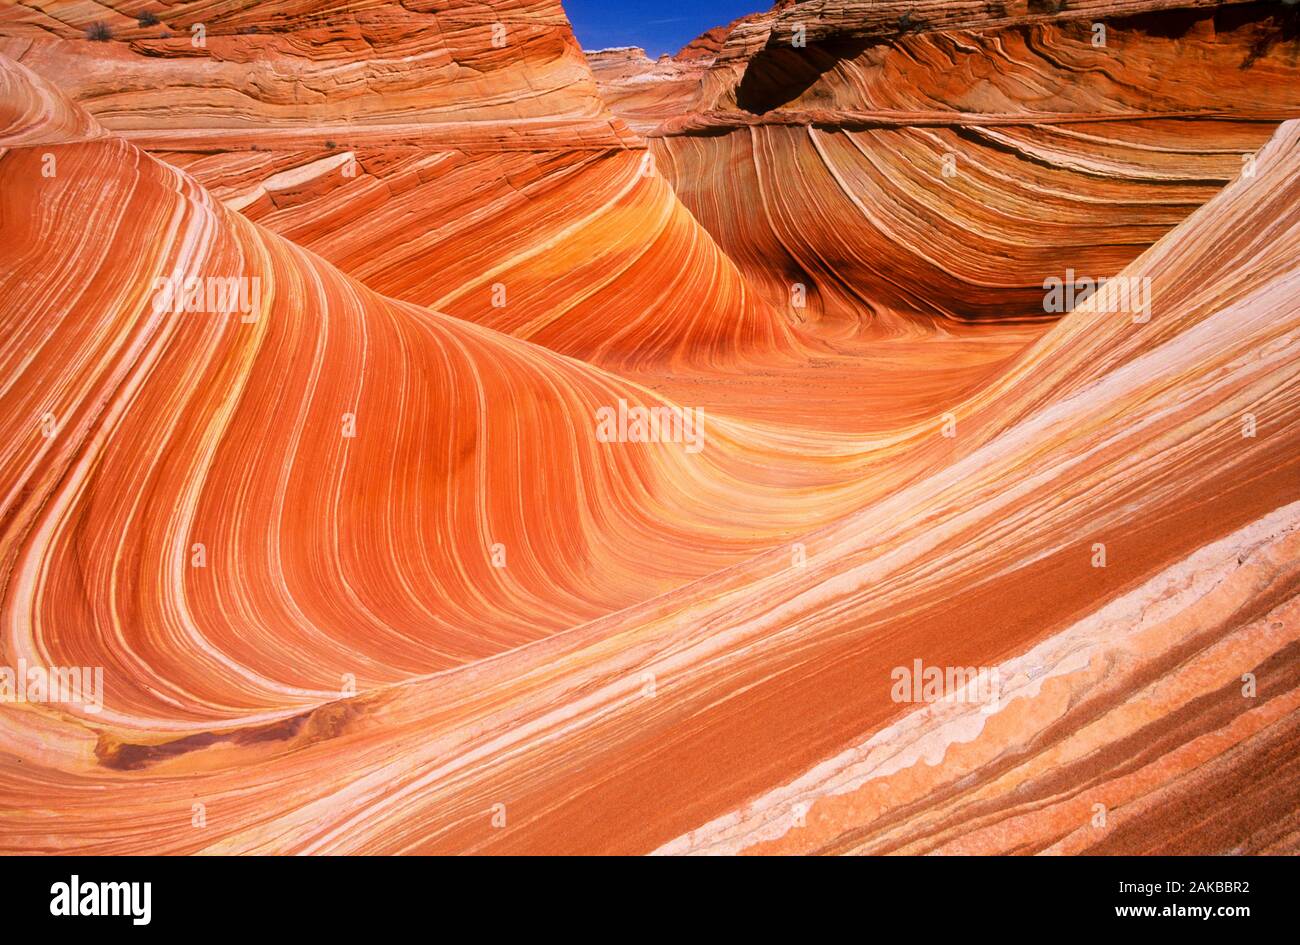 Landscape with smooth rock formations in desert, Paria Canyon-Vermilion Cliffs Wilderness Area, Arizona, USA Stock Photo